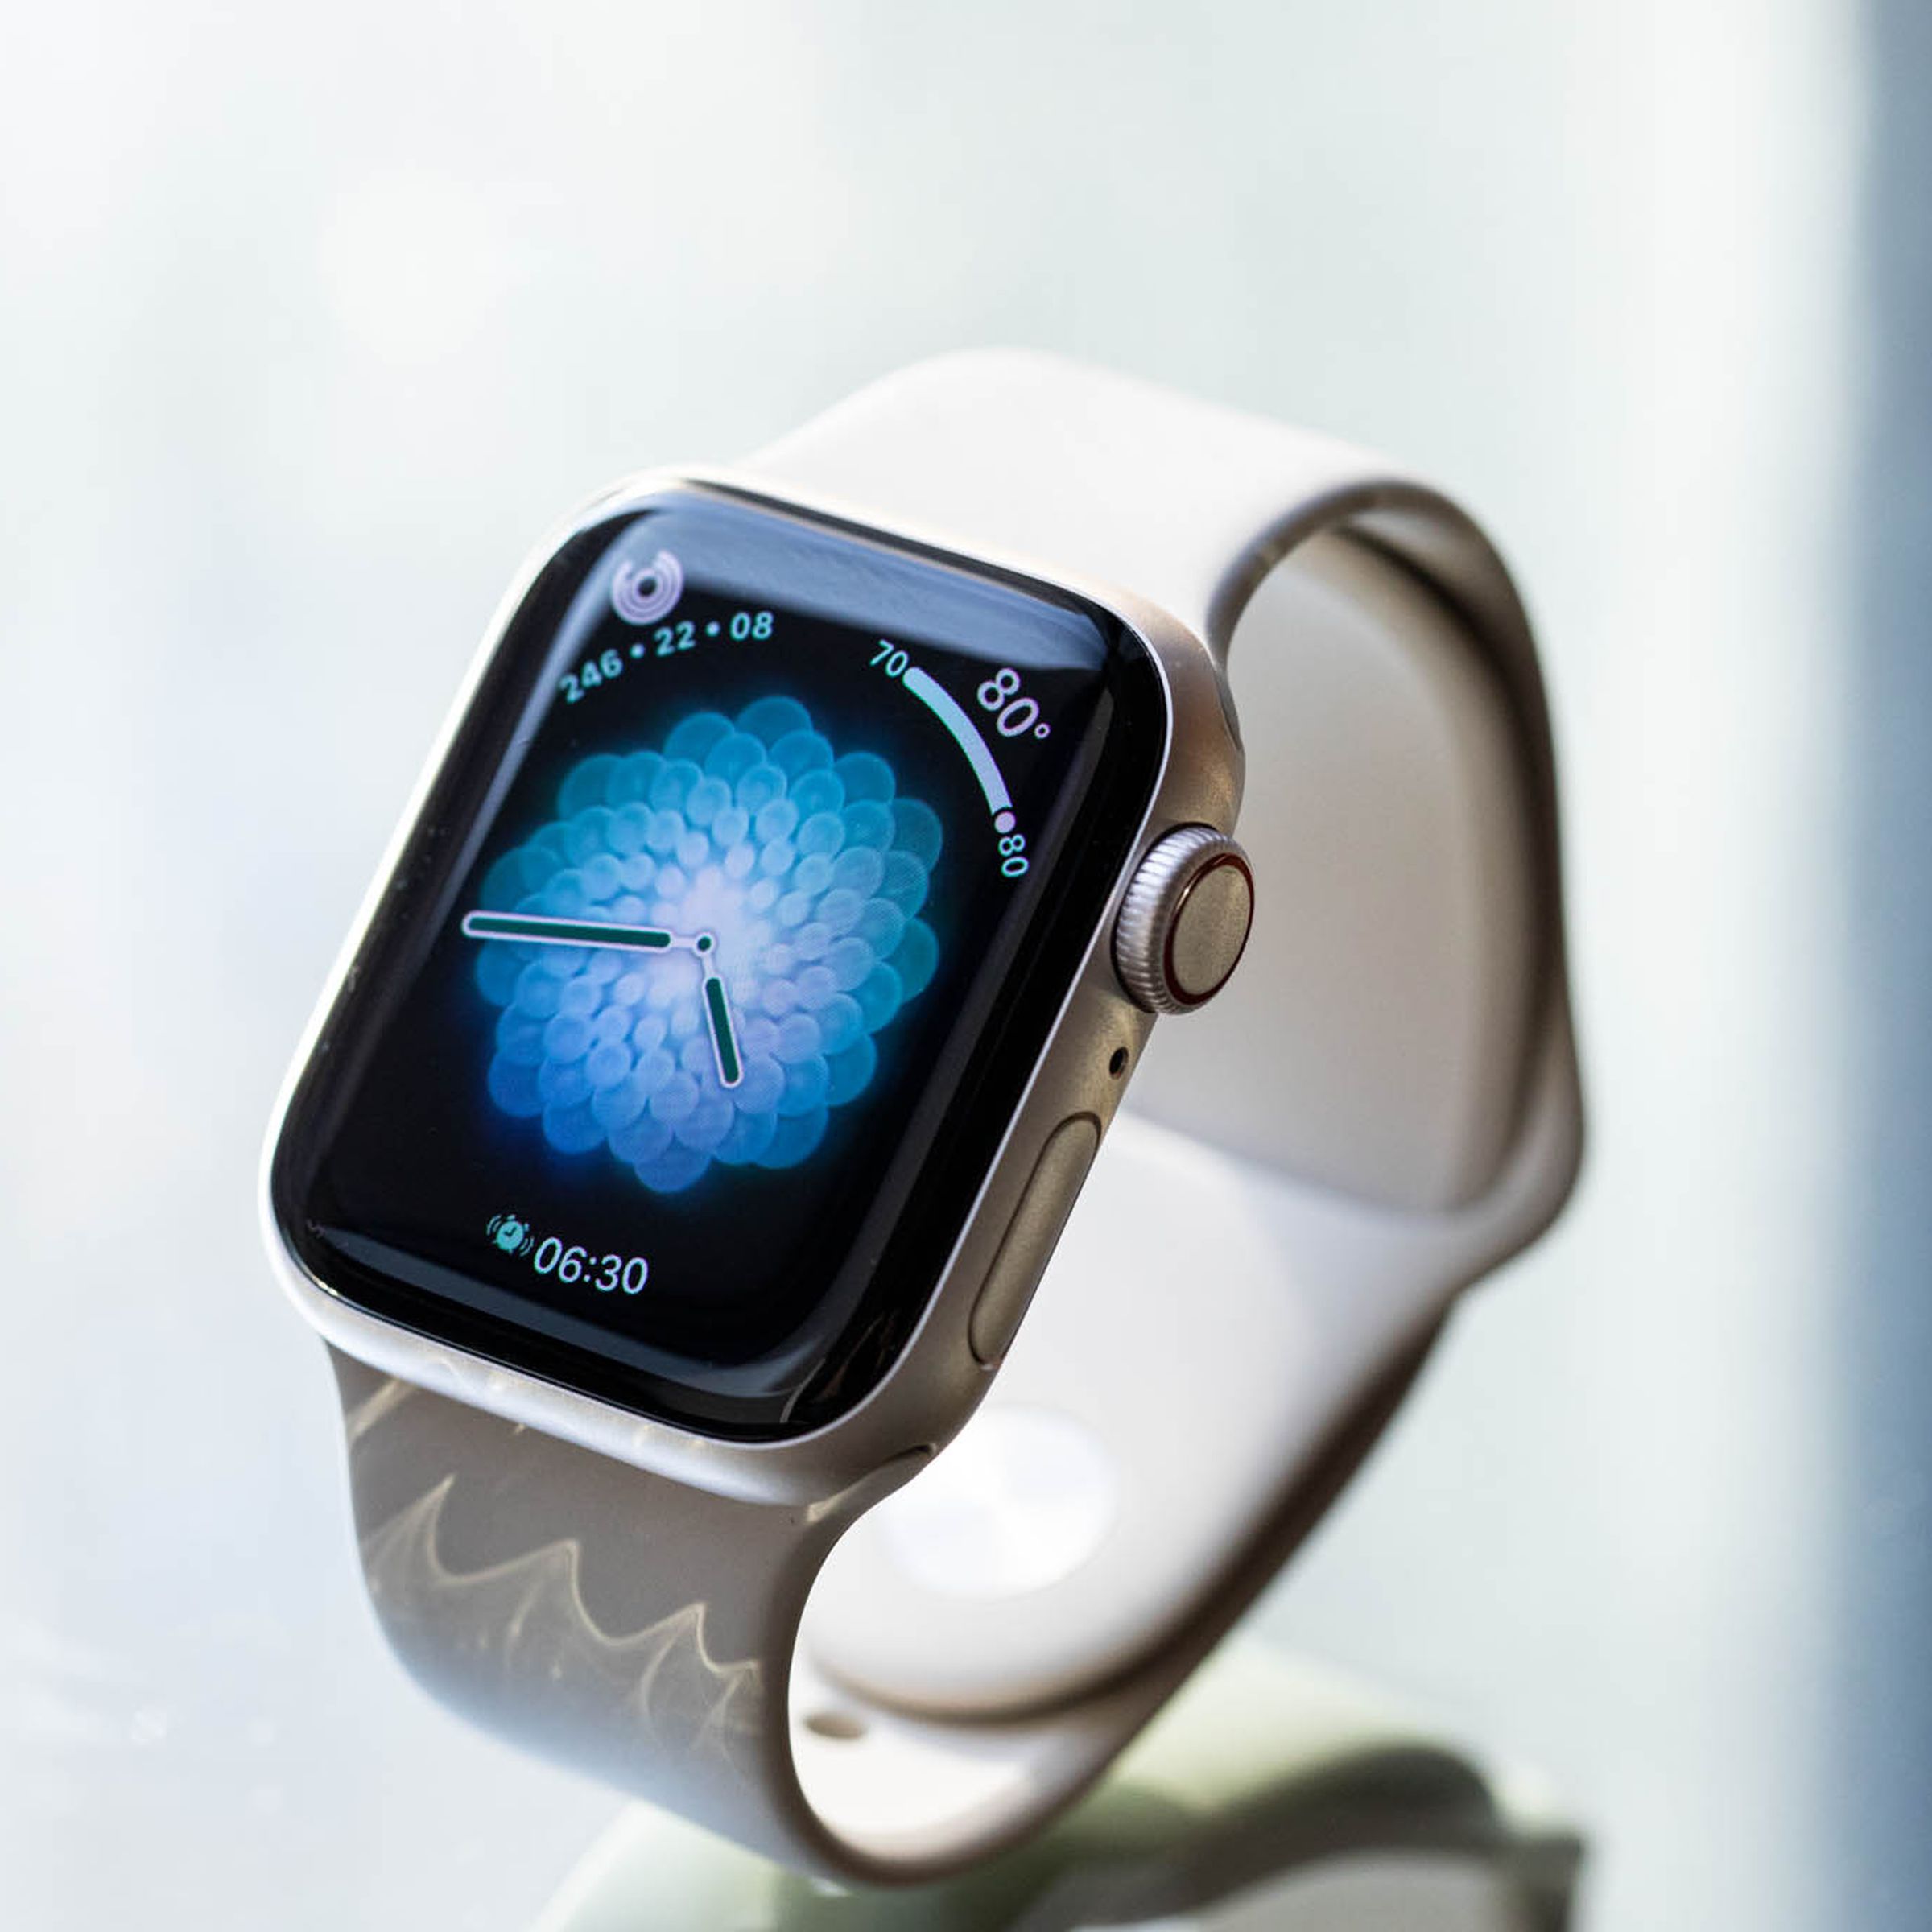 Apple Watch with Breathe watchface, which has a black border